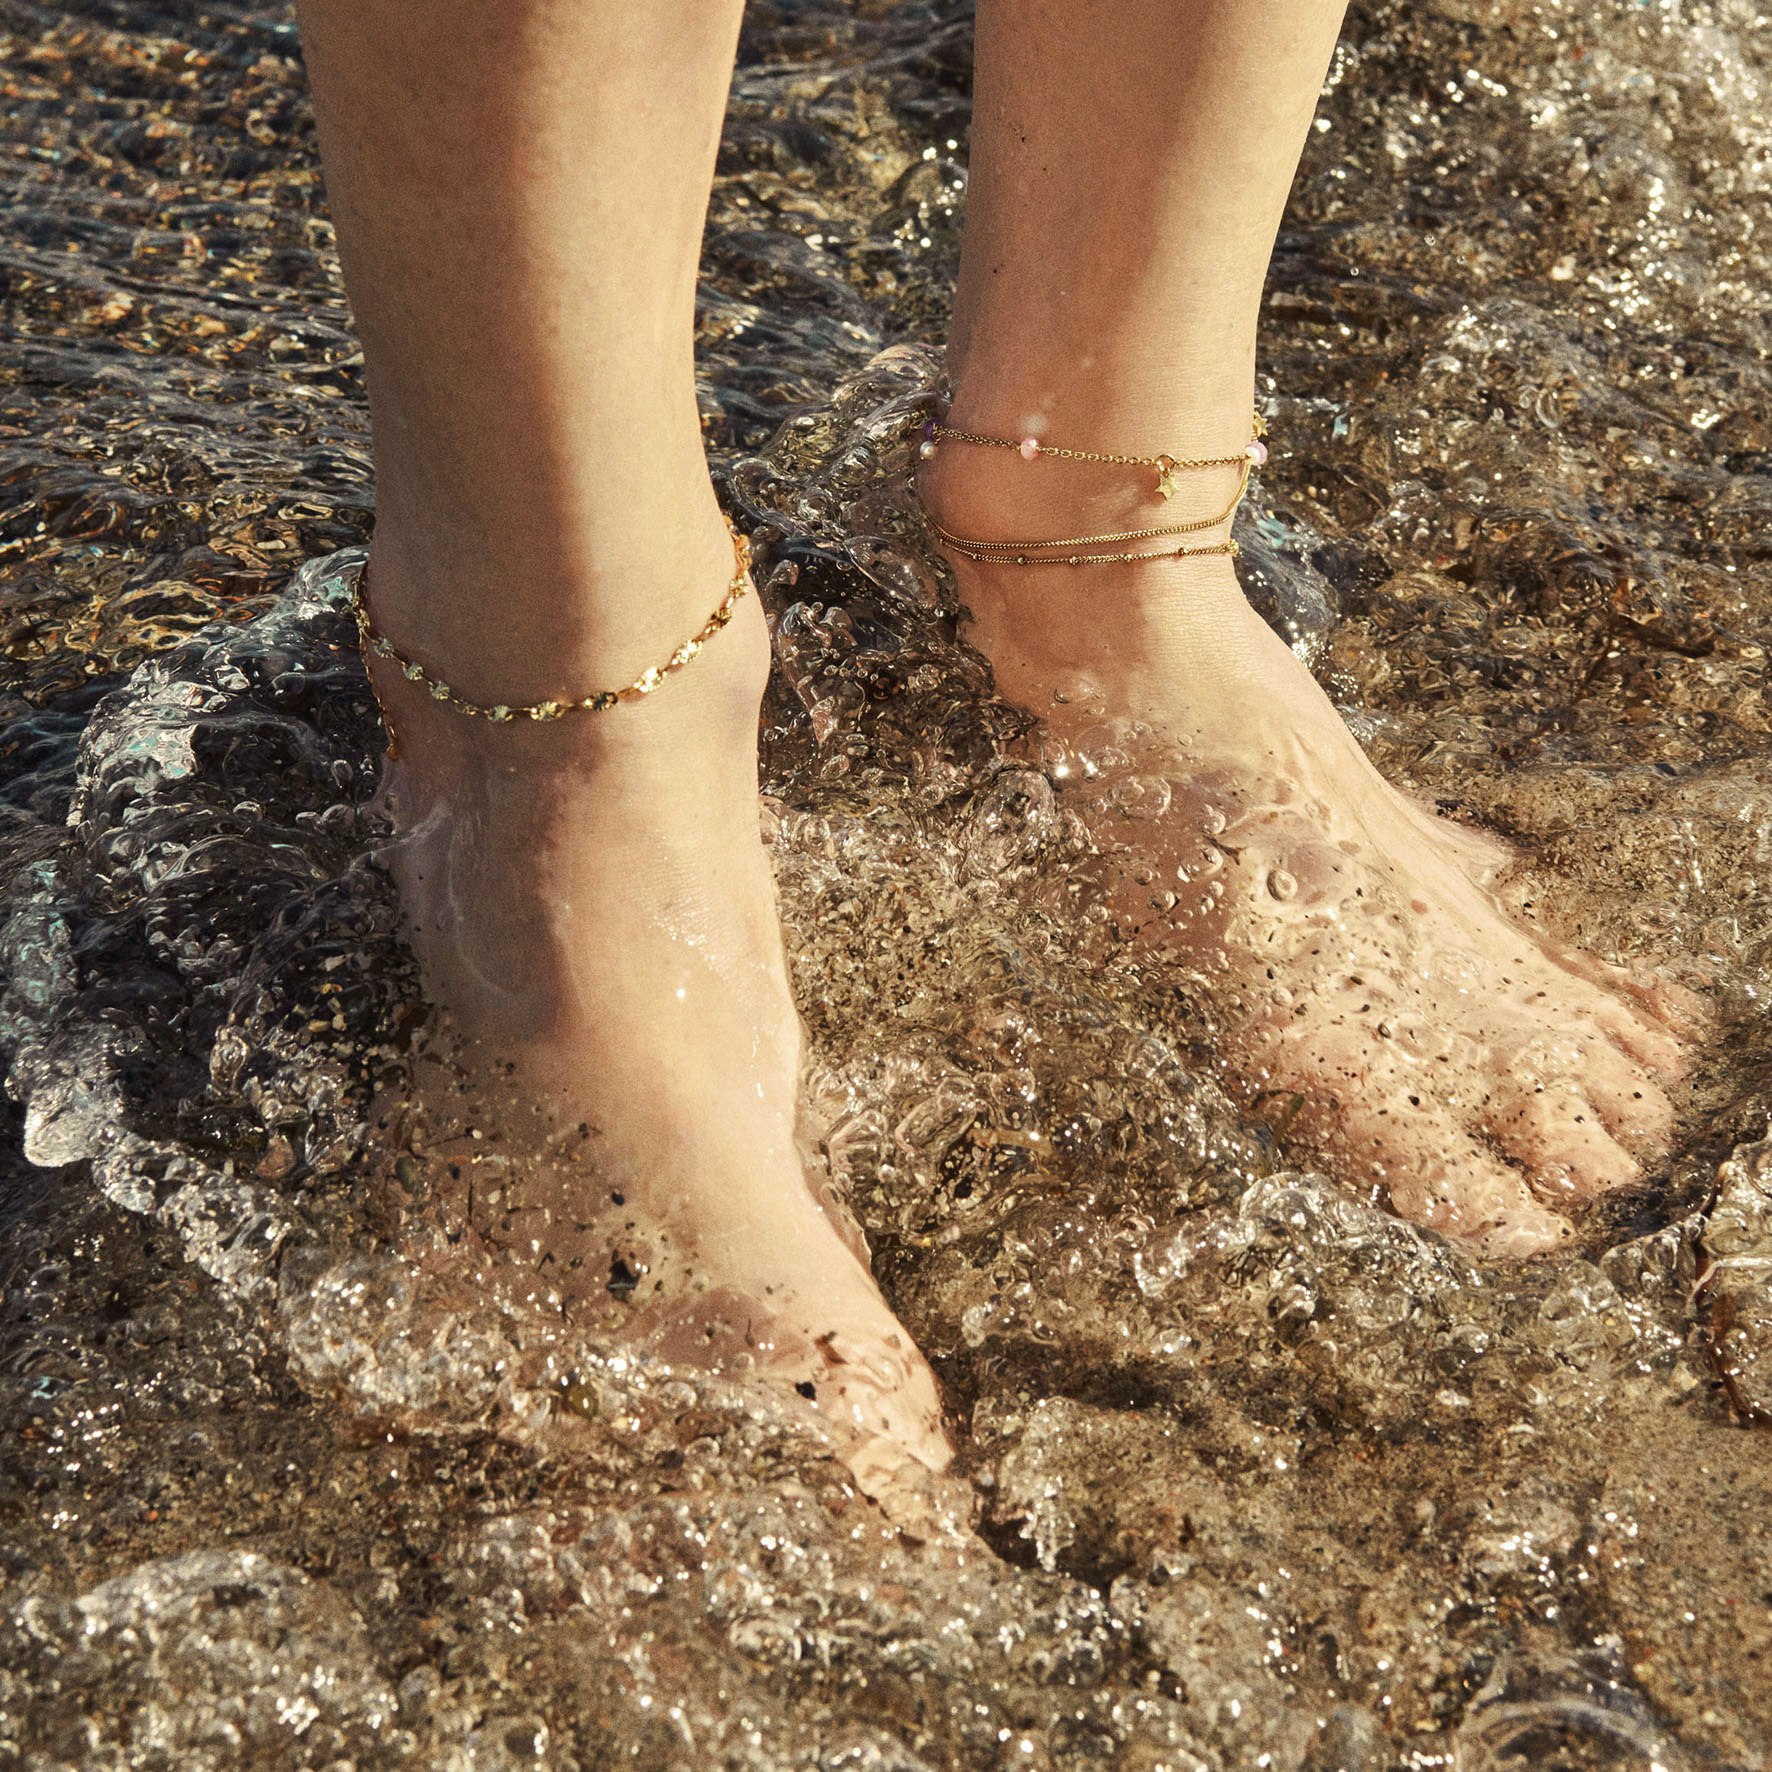 Galaxy Anklet from Pernille Corydon in Goldplated Silver Sterling 925